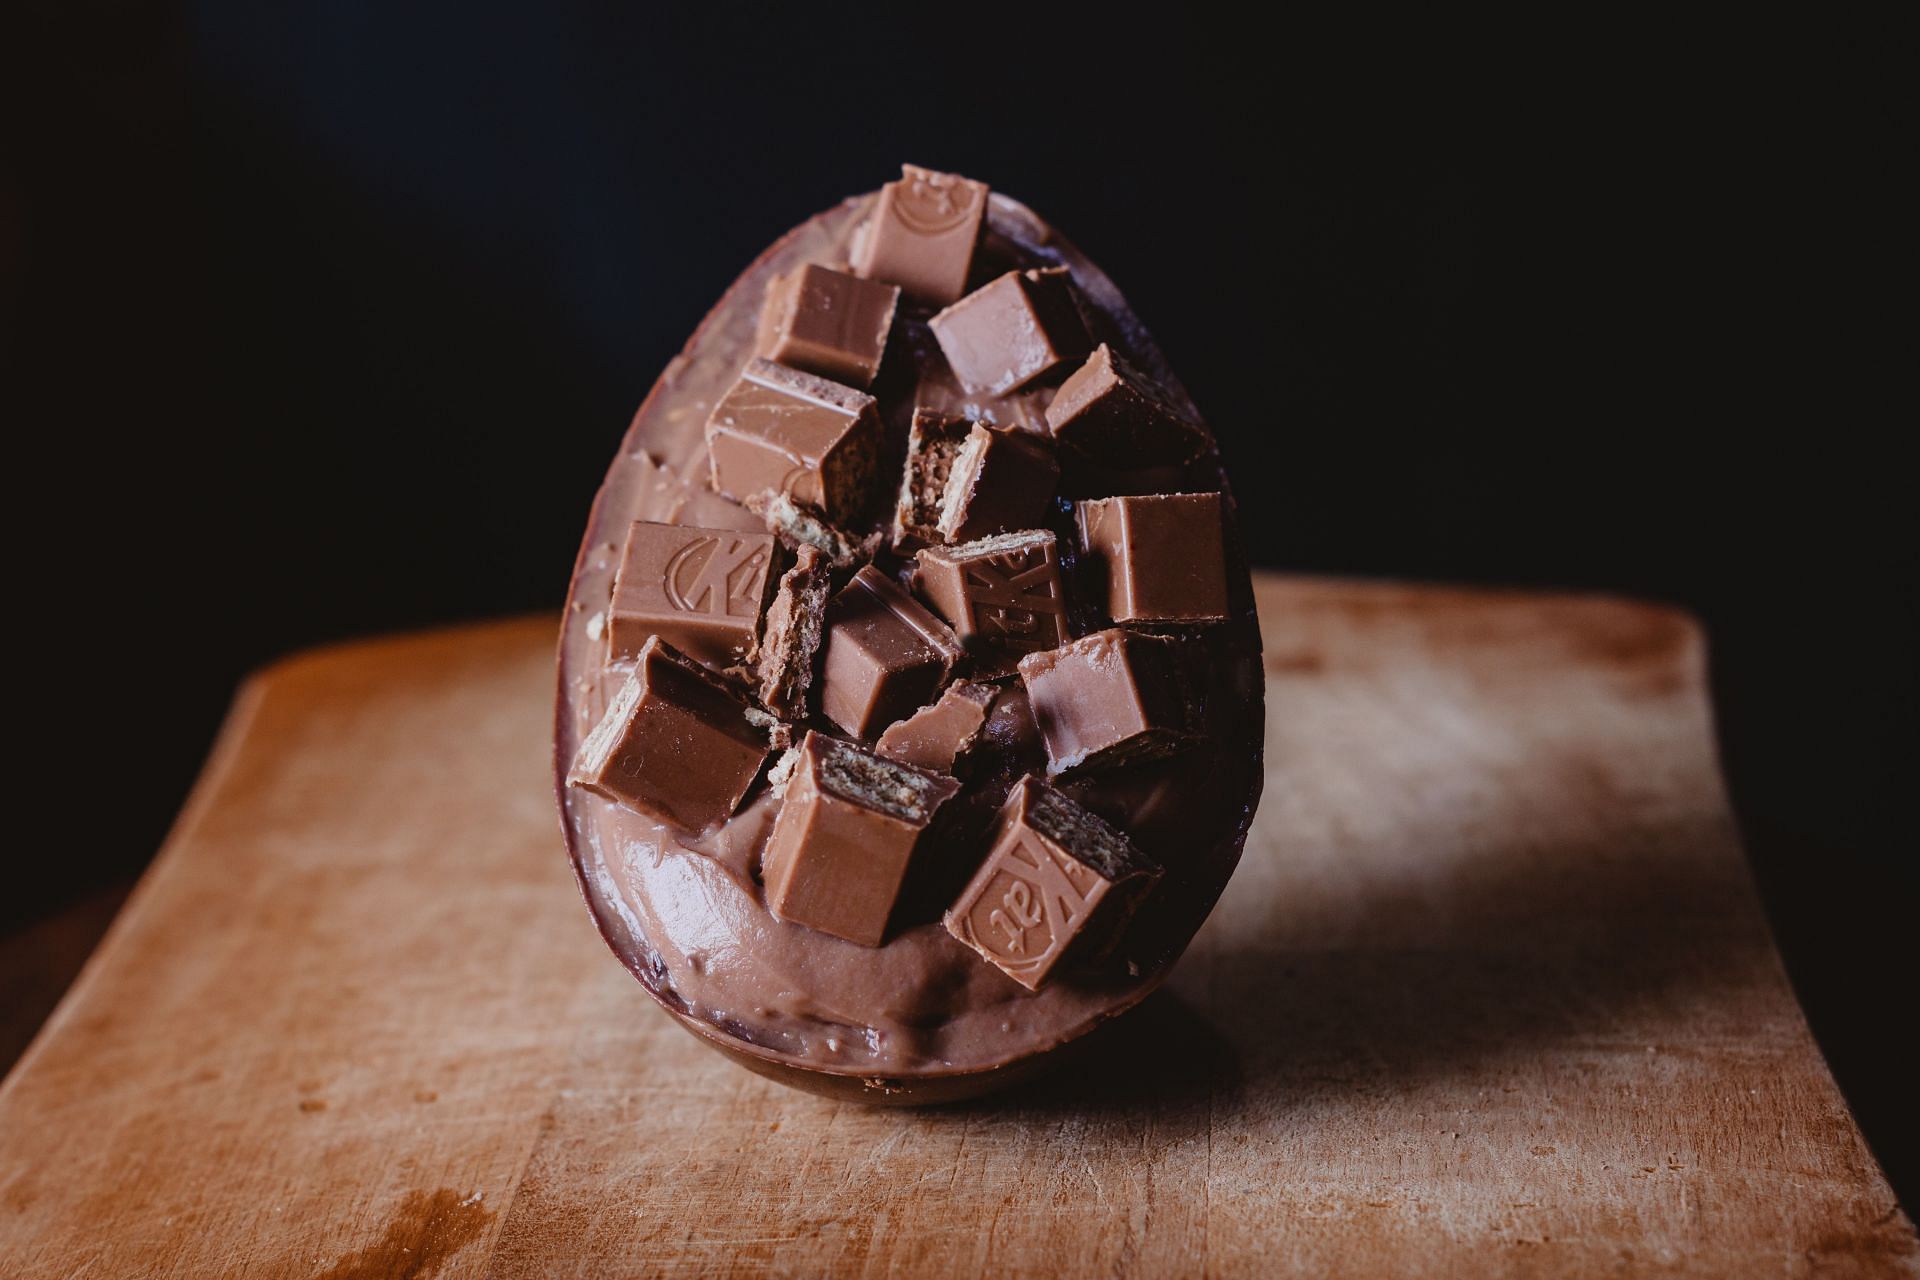 Chocolates for breakouts (image sourced via Pexels / Photo by Jakson)